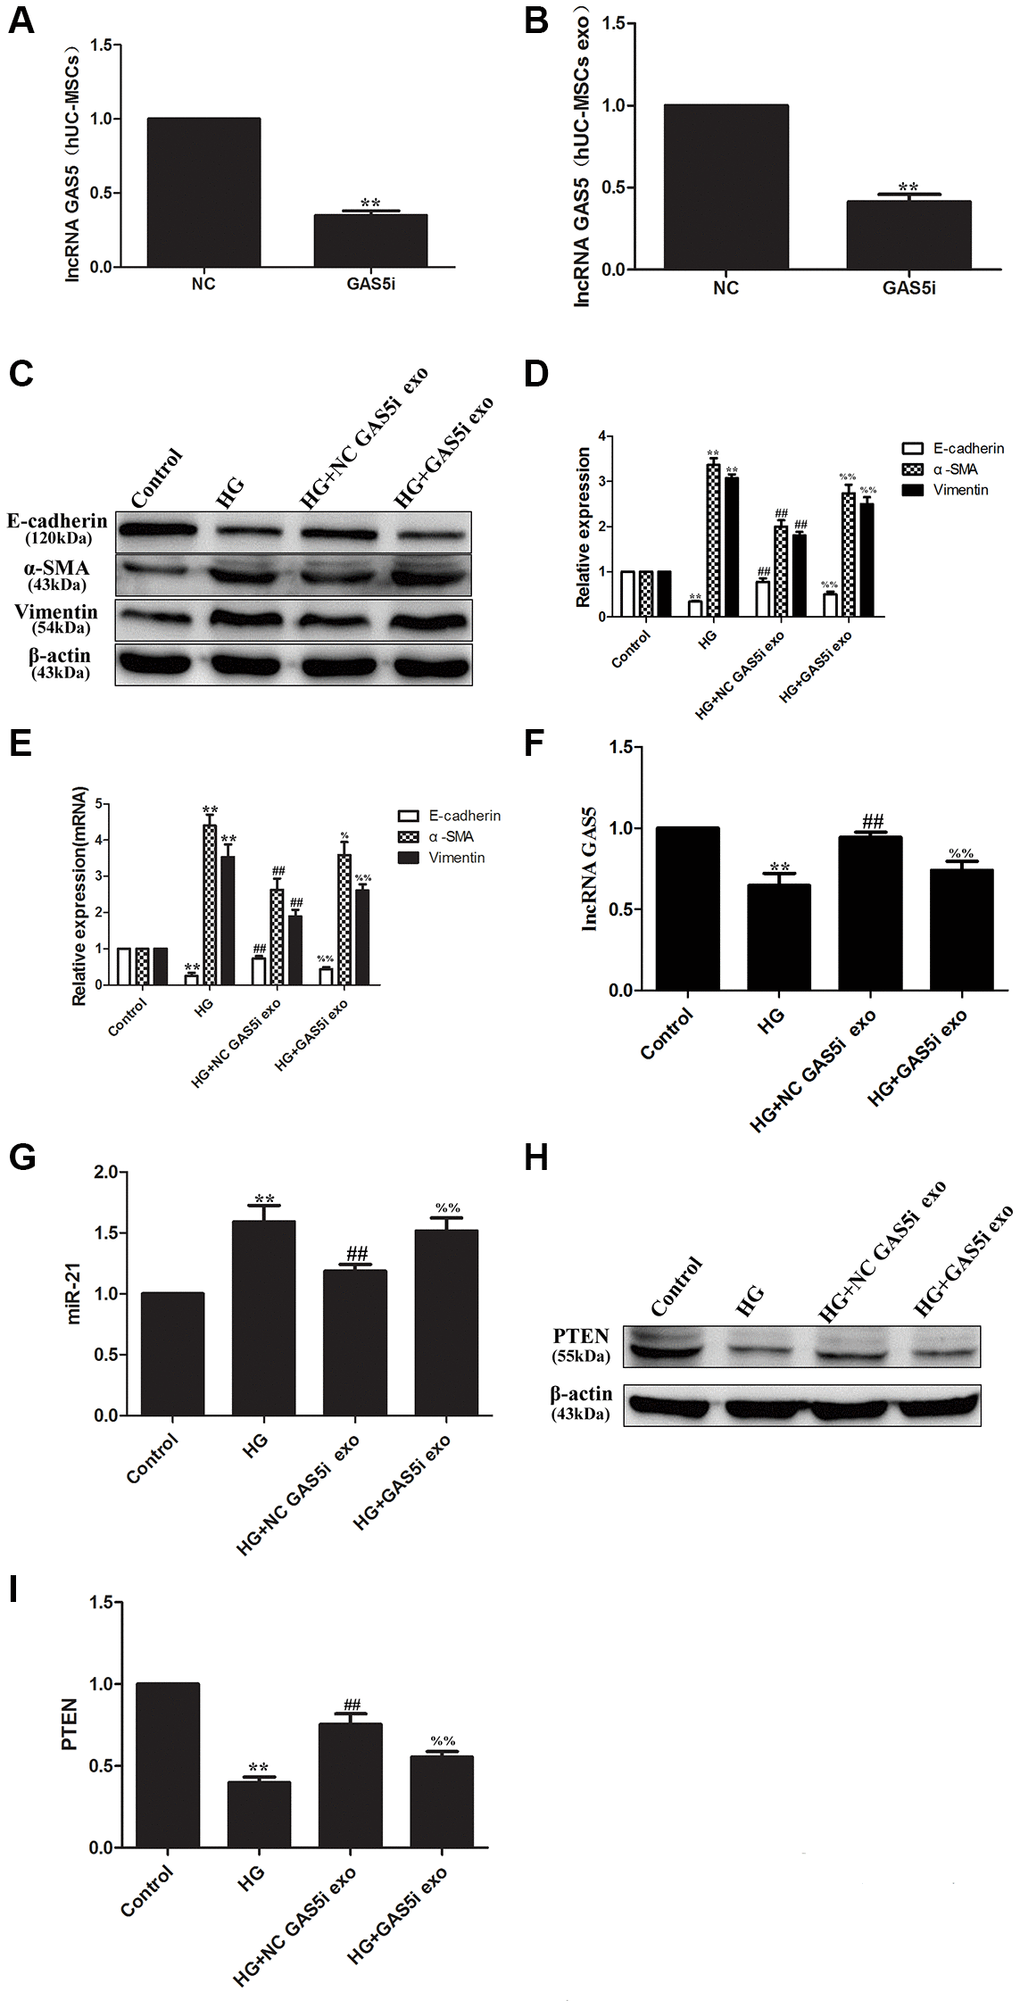 Exosomal lncRNA GAS5 from hUC-MSCs regulate suppression on target PTEN genes to alleviate EMT of HPMCs. (A, B) hUC-MSCs were transfected with lncRNA GAS5 siRNA, and the expression of lncRNA GAS5 was detected by real-time PCR in hUC-MSCs (A) and hUC-MSCs exosomes (B). (C) The expression of EMT markers was detected by Western Blot in HPMCs. (D) Statistical results of EMT changes after HG and hUC-MSCs/hUC-MSCs exosomes treatment. (E) The expression of EMT markers was detected by real-time PCR in HPMCs. (F) The expression of lncRNA GAS5 was detected by real-time PCR in HPMCs. (G) The expression of miRNA-21 was detected by real-time PCR in HPMCs. (H) The expression of PTEN was detected by Western Blot in HPMCs. (I) Statistical results of PTEN changes after HG and hUC-MSCs/hUC-MSCs exosomes treatment. Each value represents the mean ± SEM (n = 3) (**P ##P %%P %P 